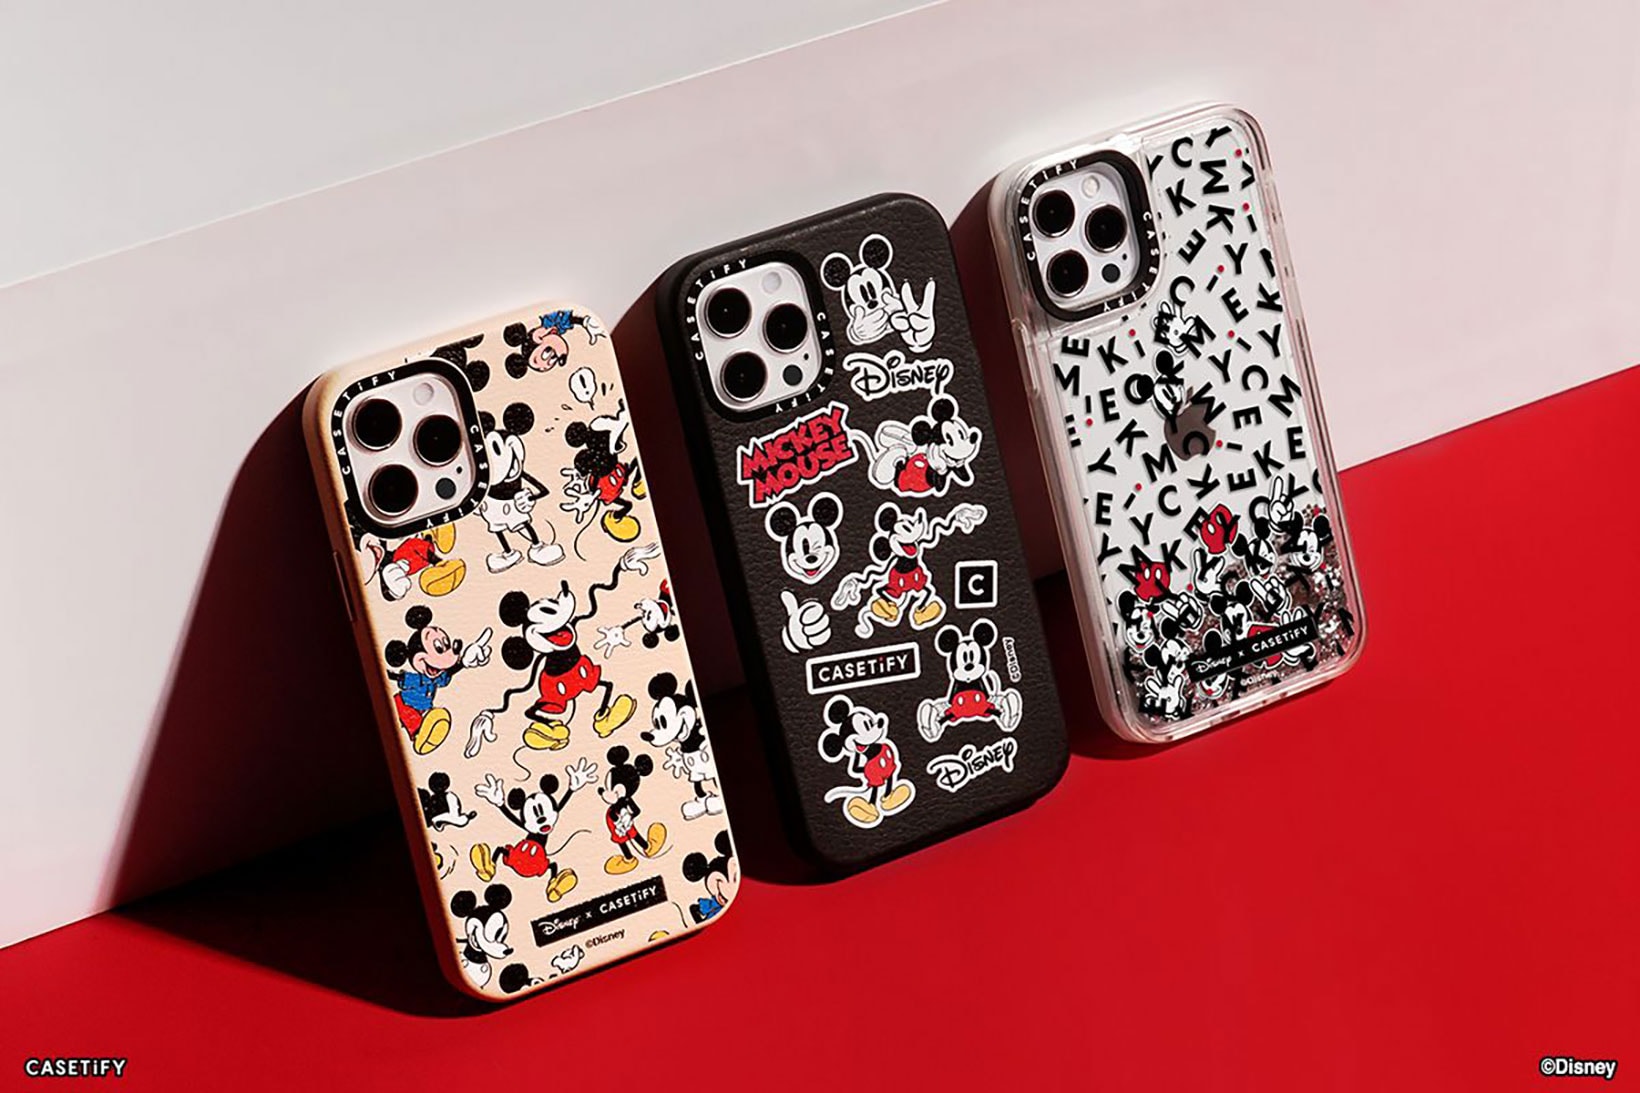 disney casetify collaboration phone cases apple iphone accessories mickey mouse